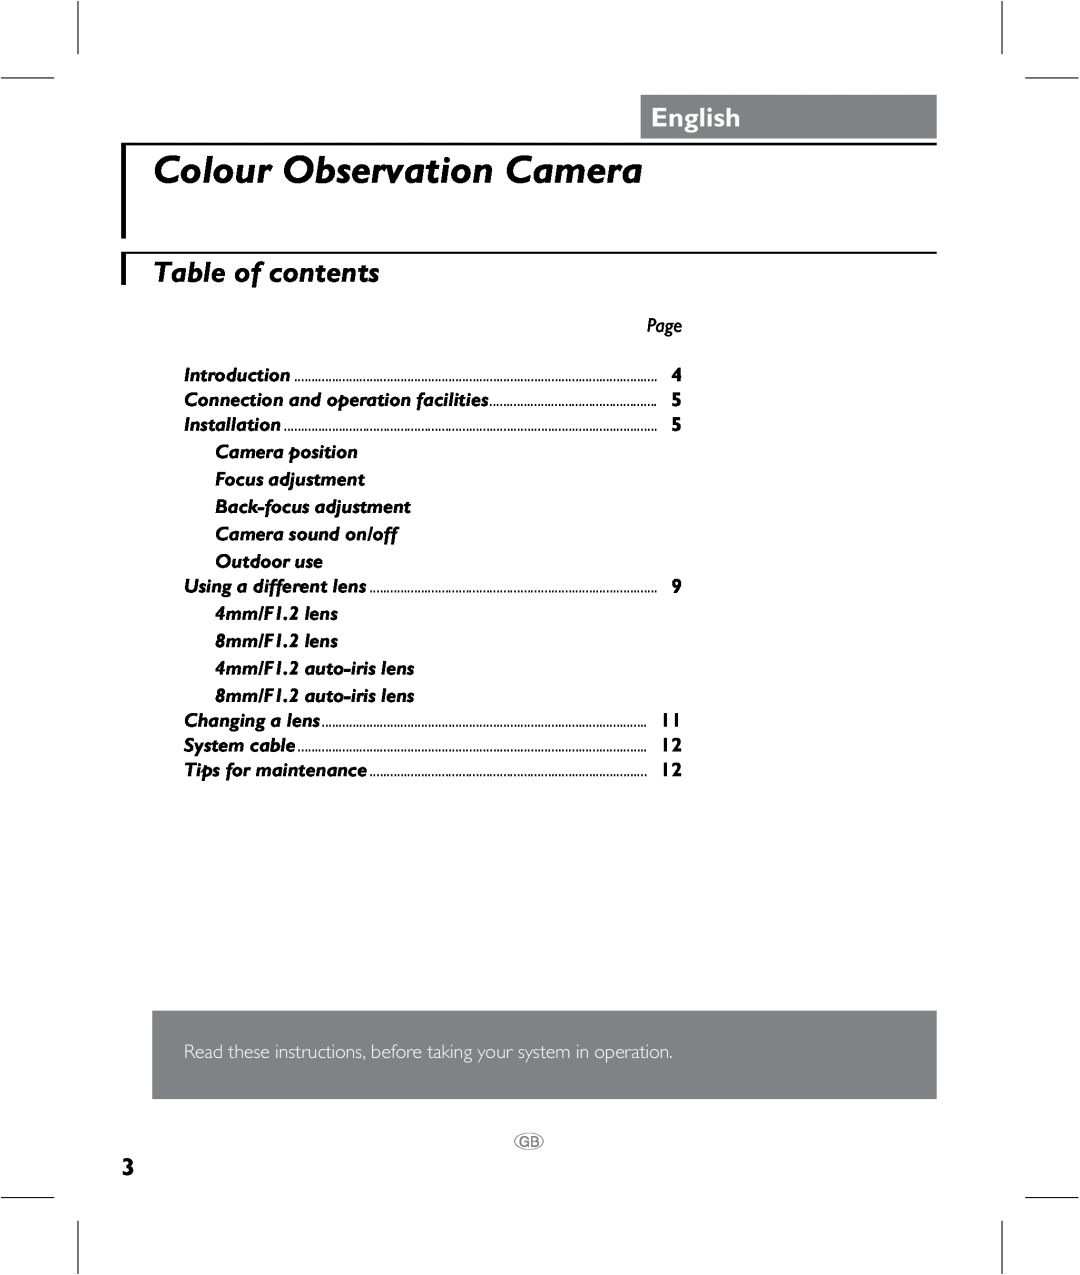 Philips VCM7177 Table of contents, Colour Observation Camera, English, Camera position, Focus adjustment, Outdoor use 